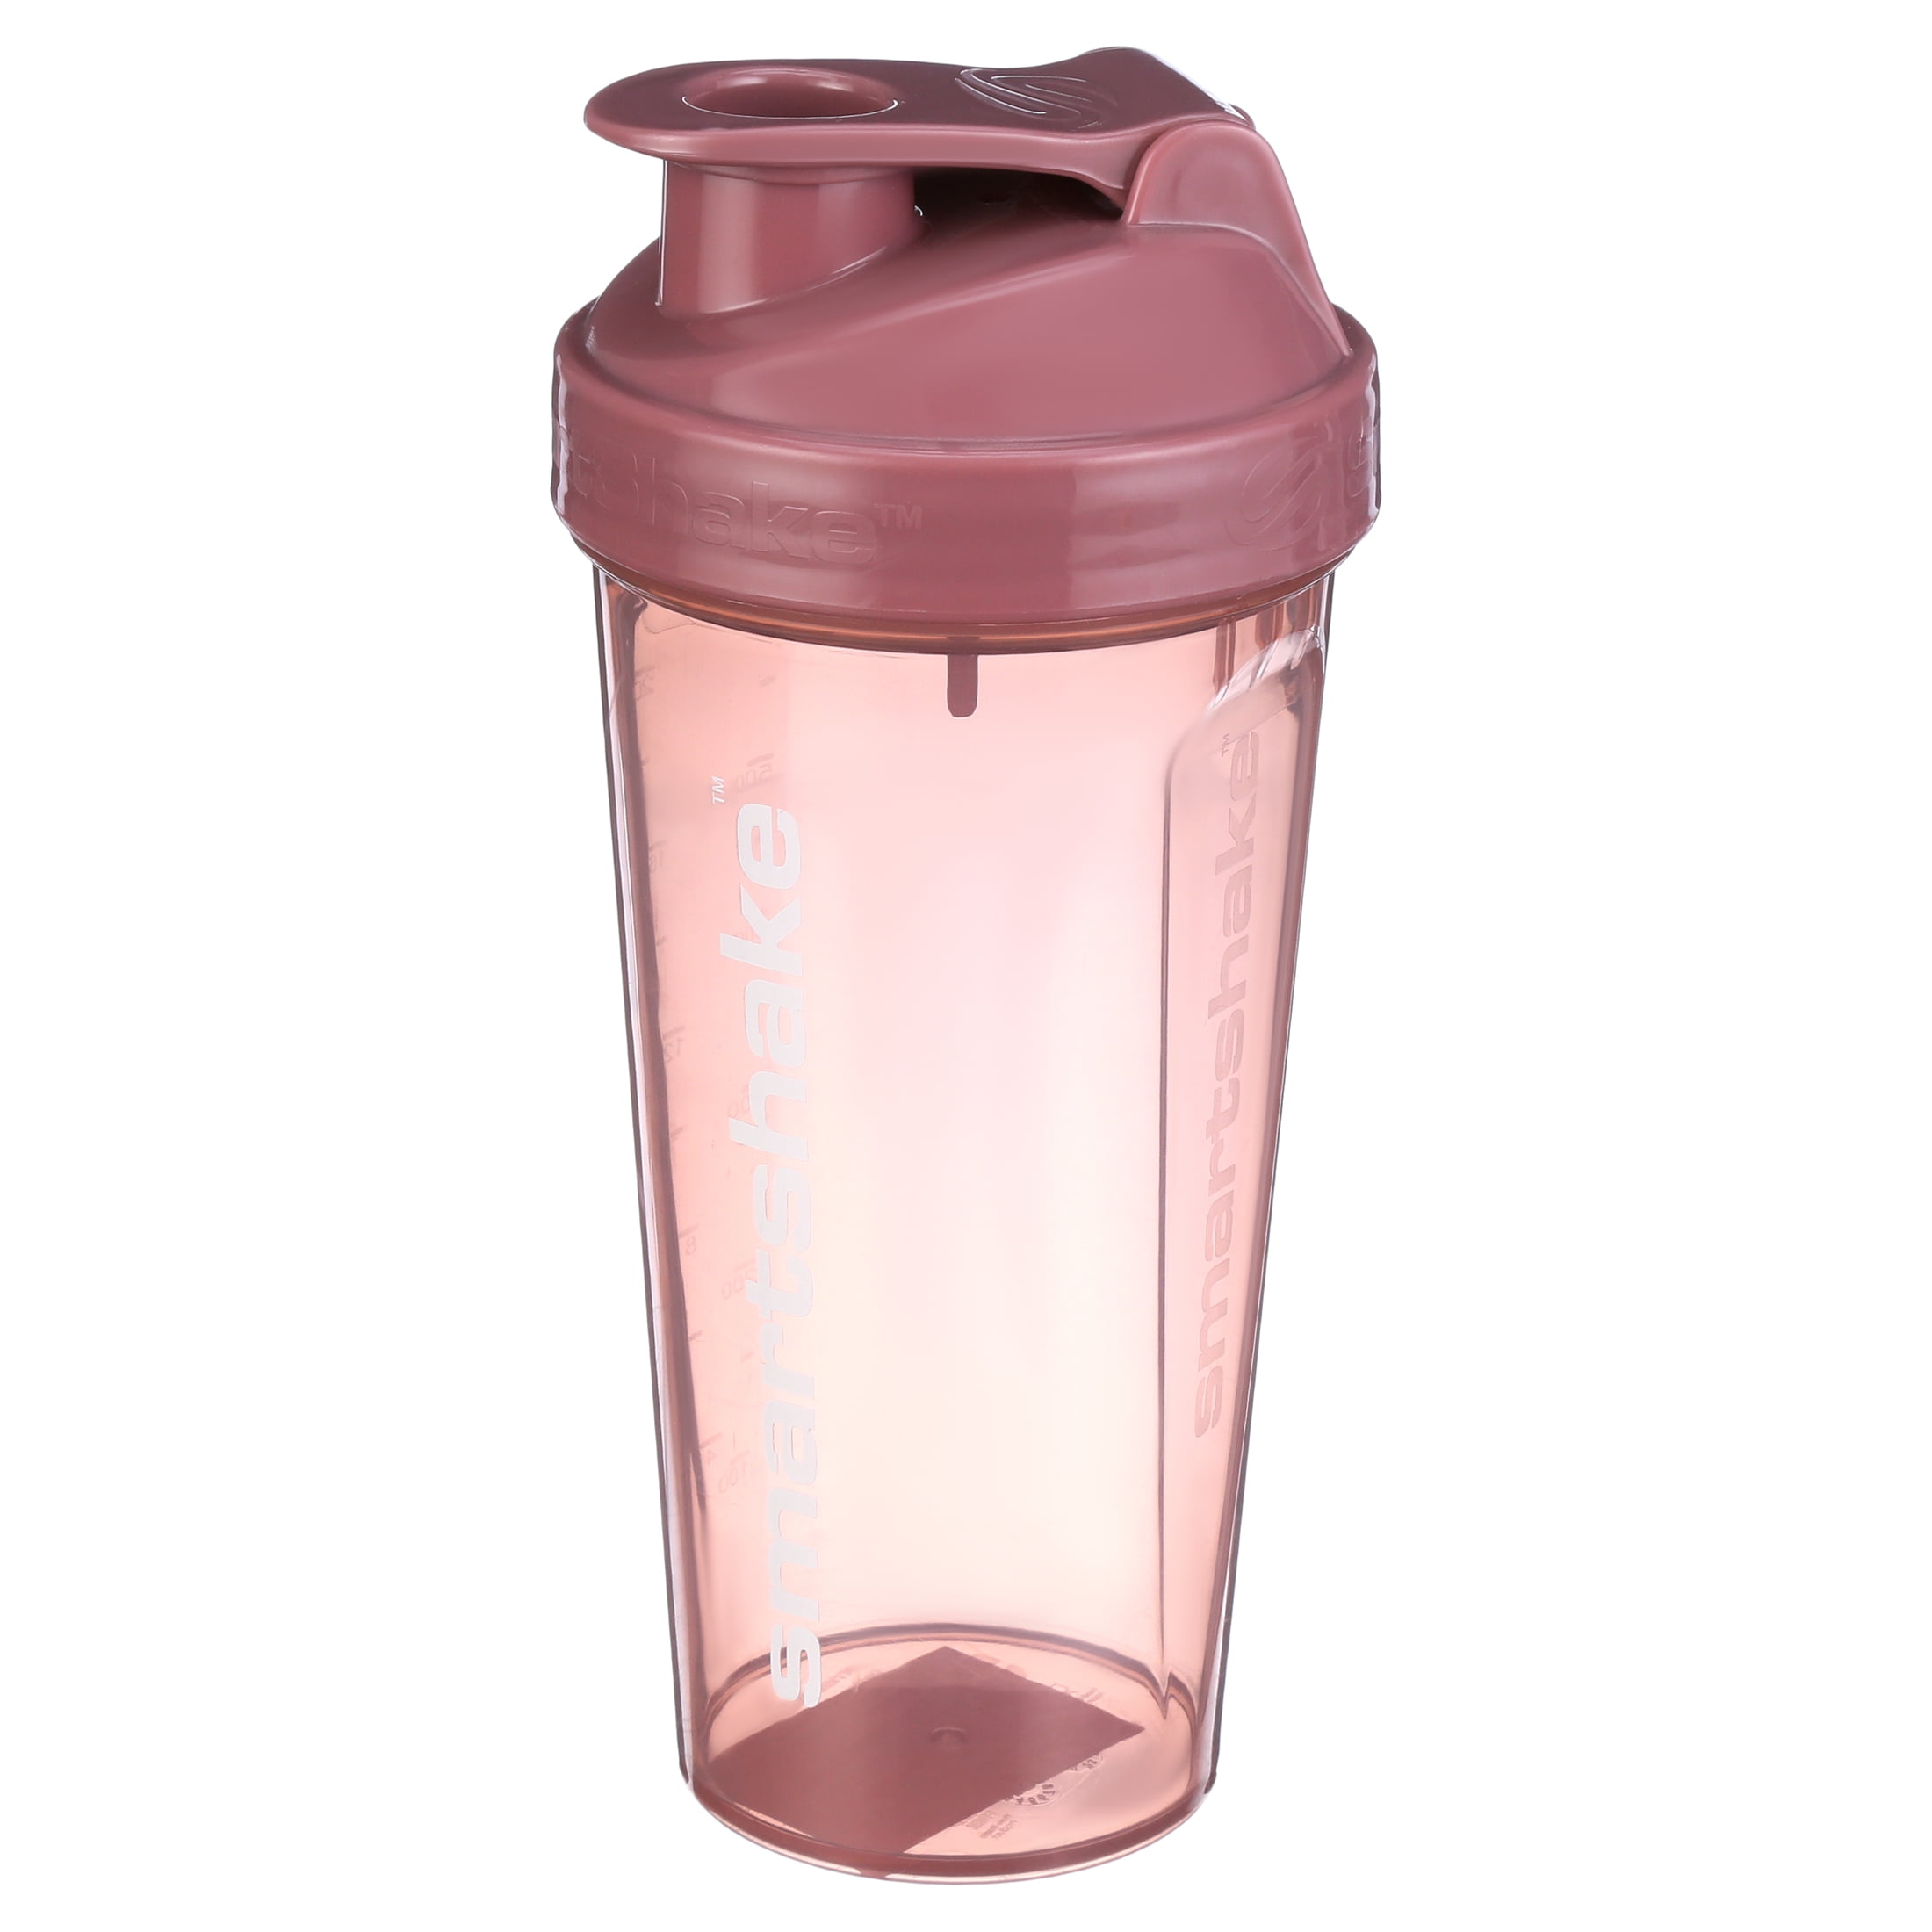 Sweat Ethic Shaker Cup 27 oz.